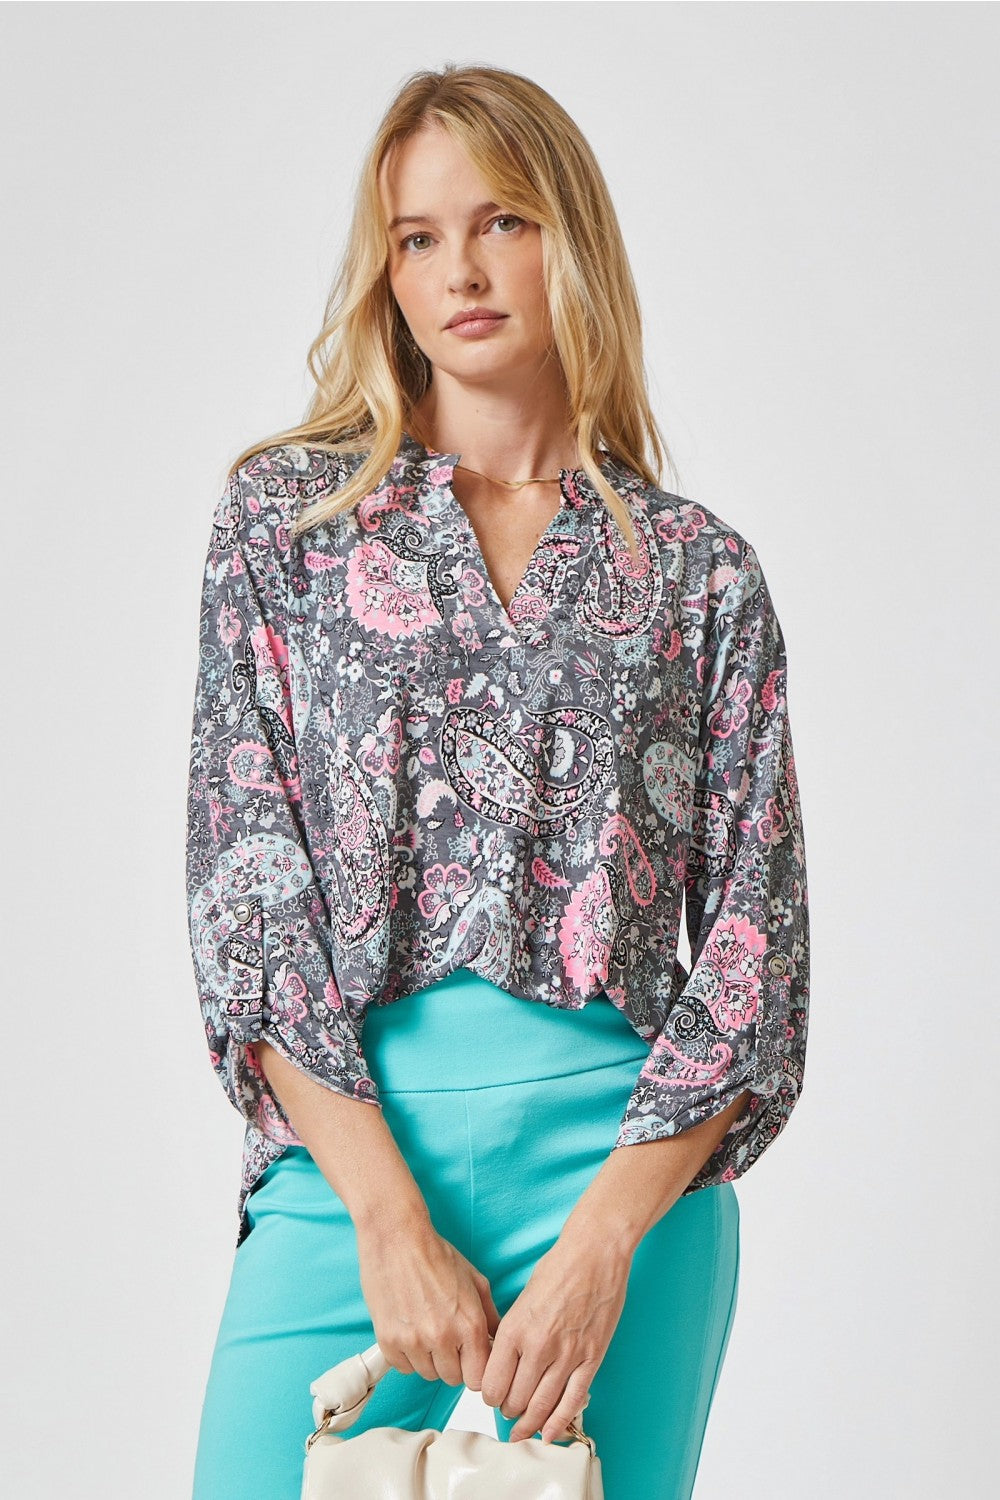 Shades of Grey & Pink Paisley  Lizzy Top